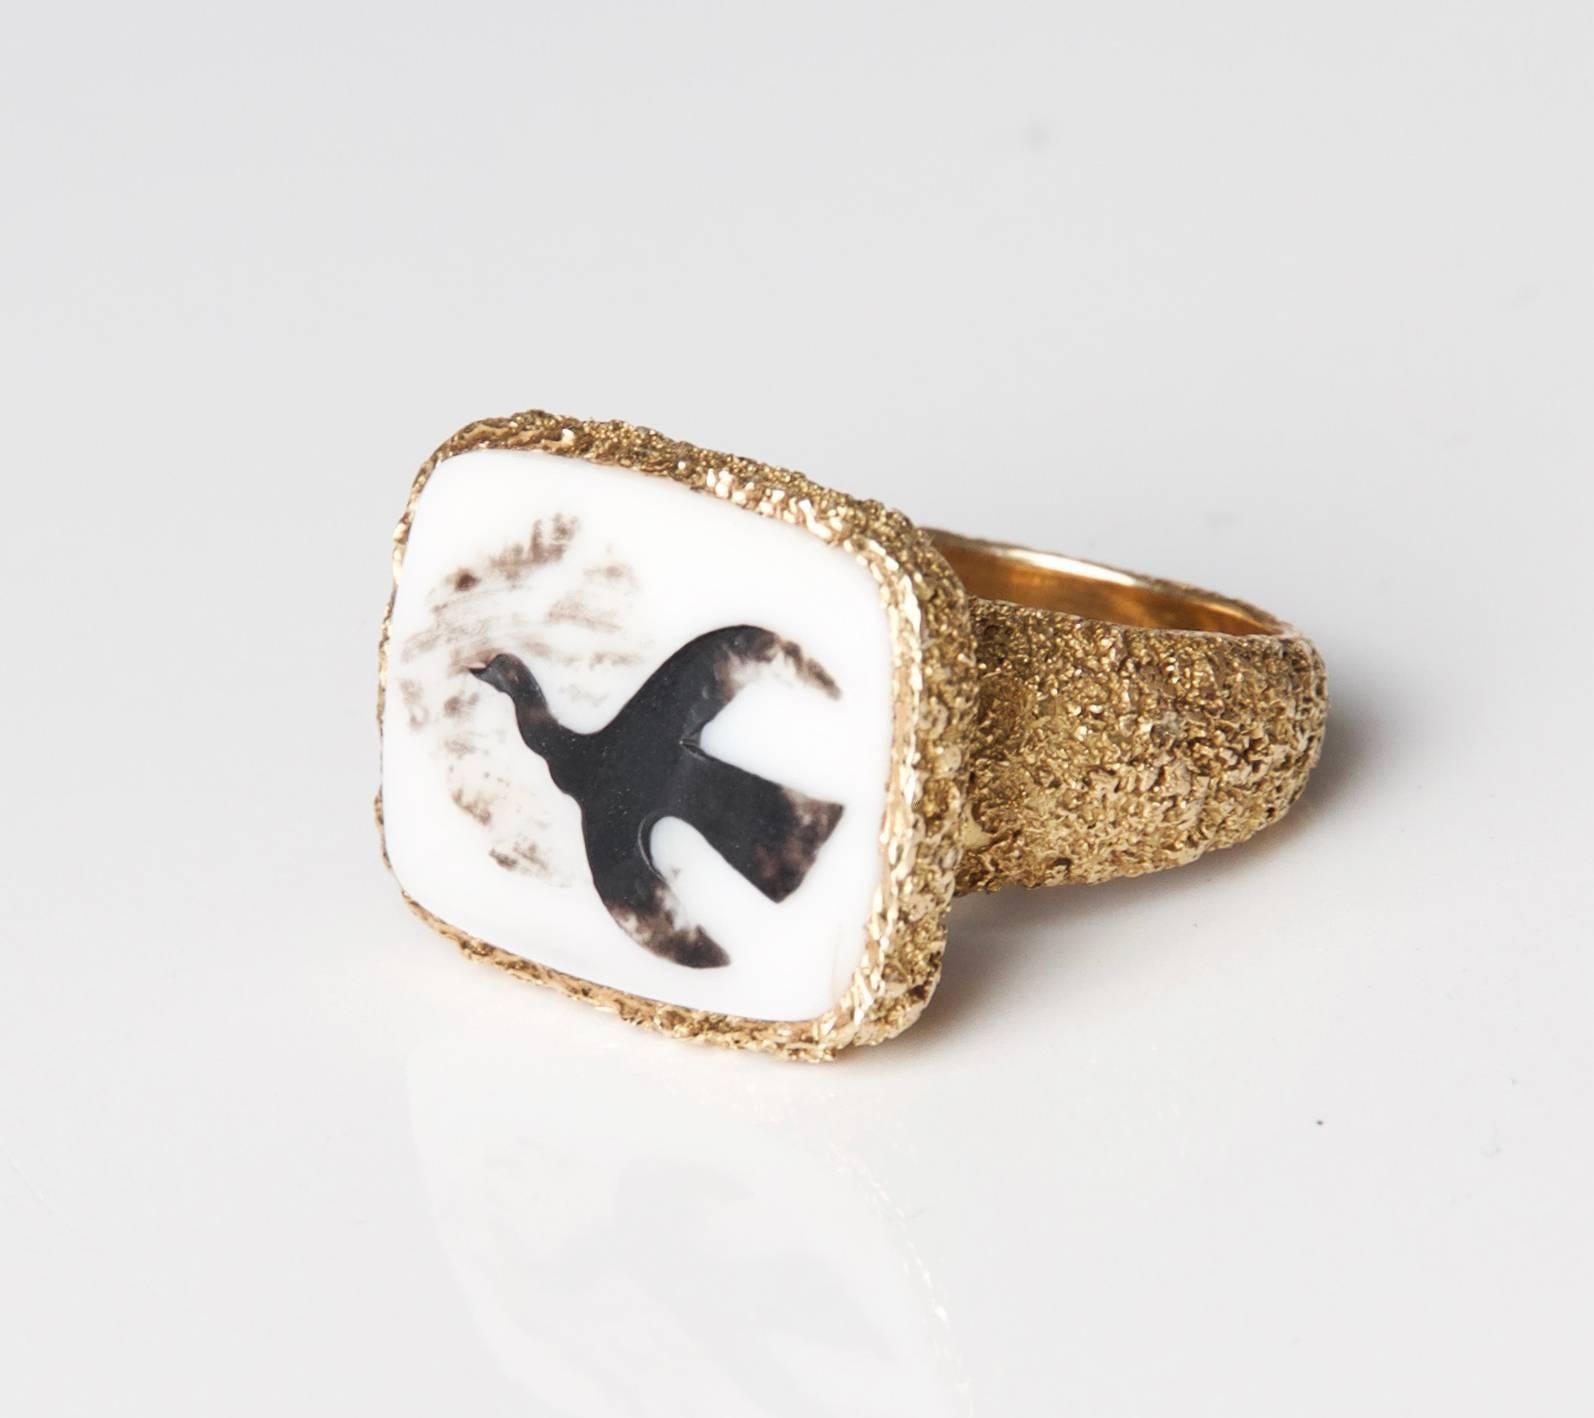 Very Rare 18K gold (marked), Onyx and White Agate cameo ring, called 'Megaletor III' by Georges Braque (1882-1963), inventor of cubism. 

This ring was manufactured by Heger de Loewenfeld after the gouache "Megaletor" (Picture 4) in 1962